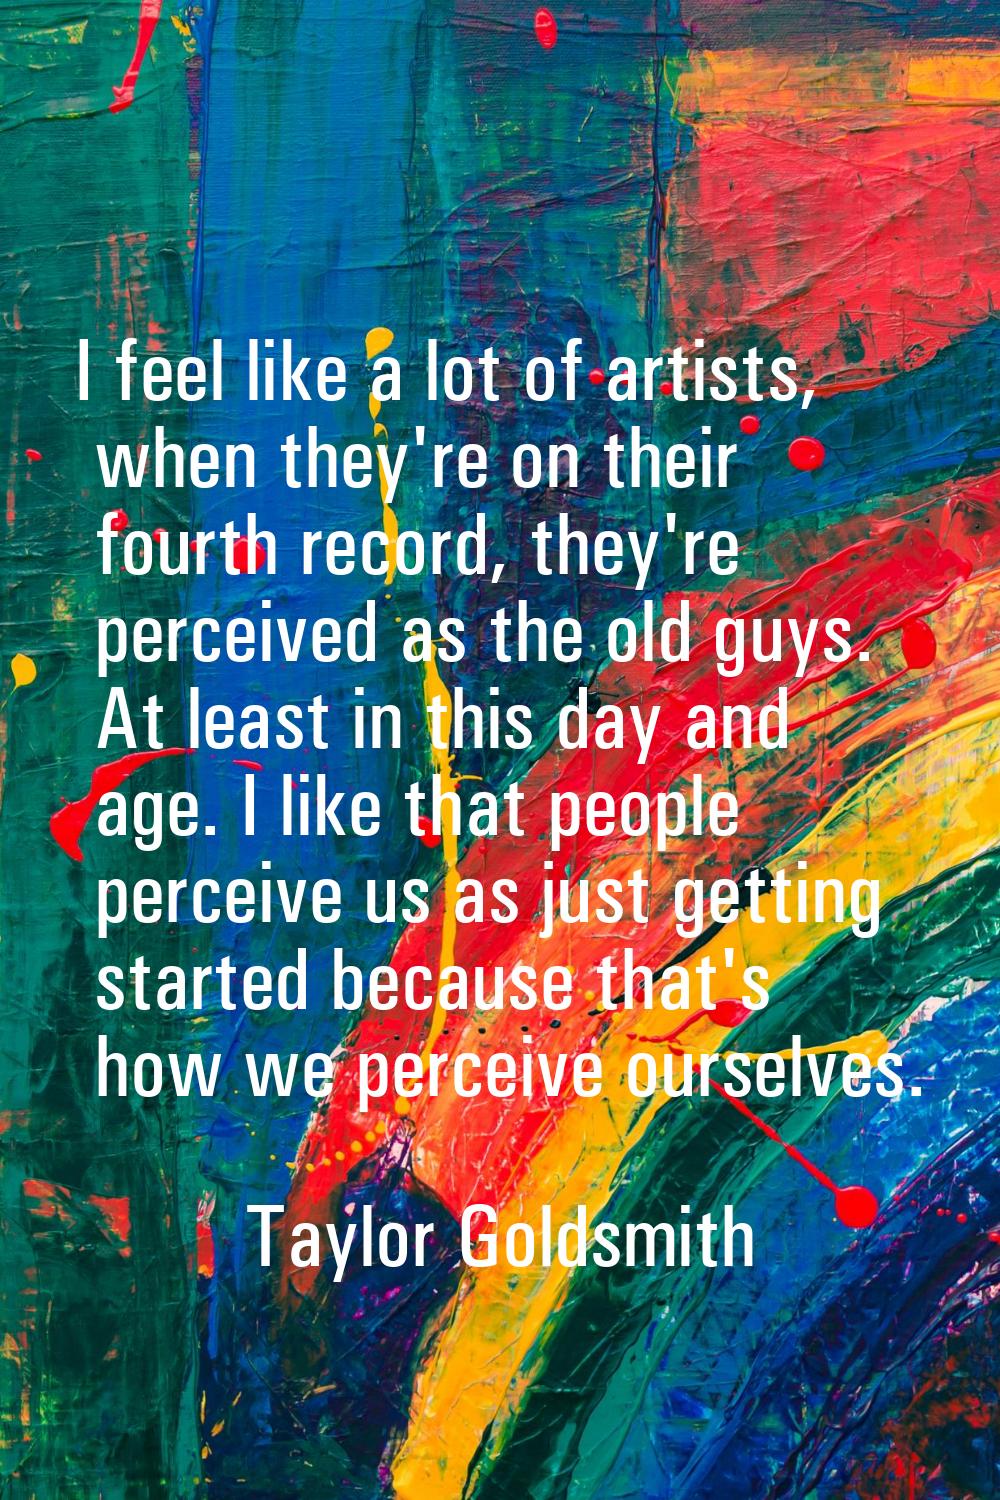 I feel like a lot of artists, when they're on their fourth record, they're perceived as the old guy